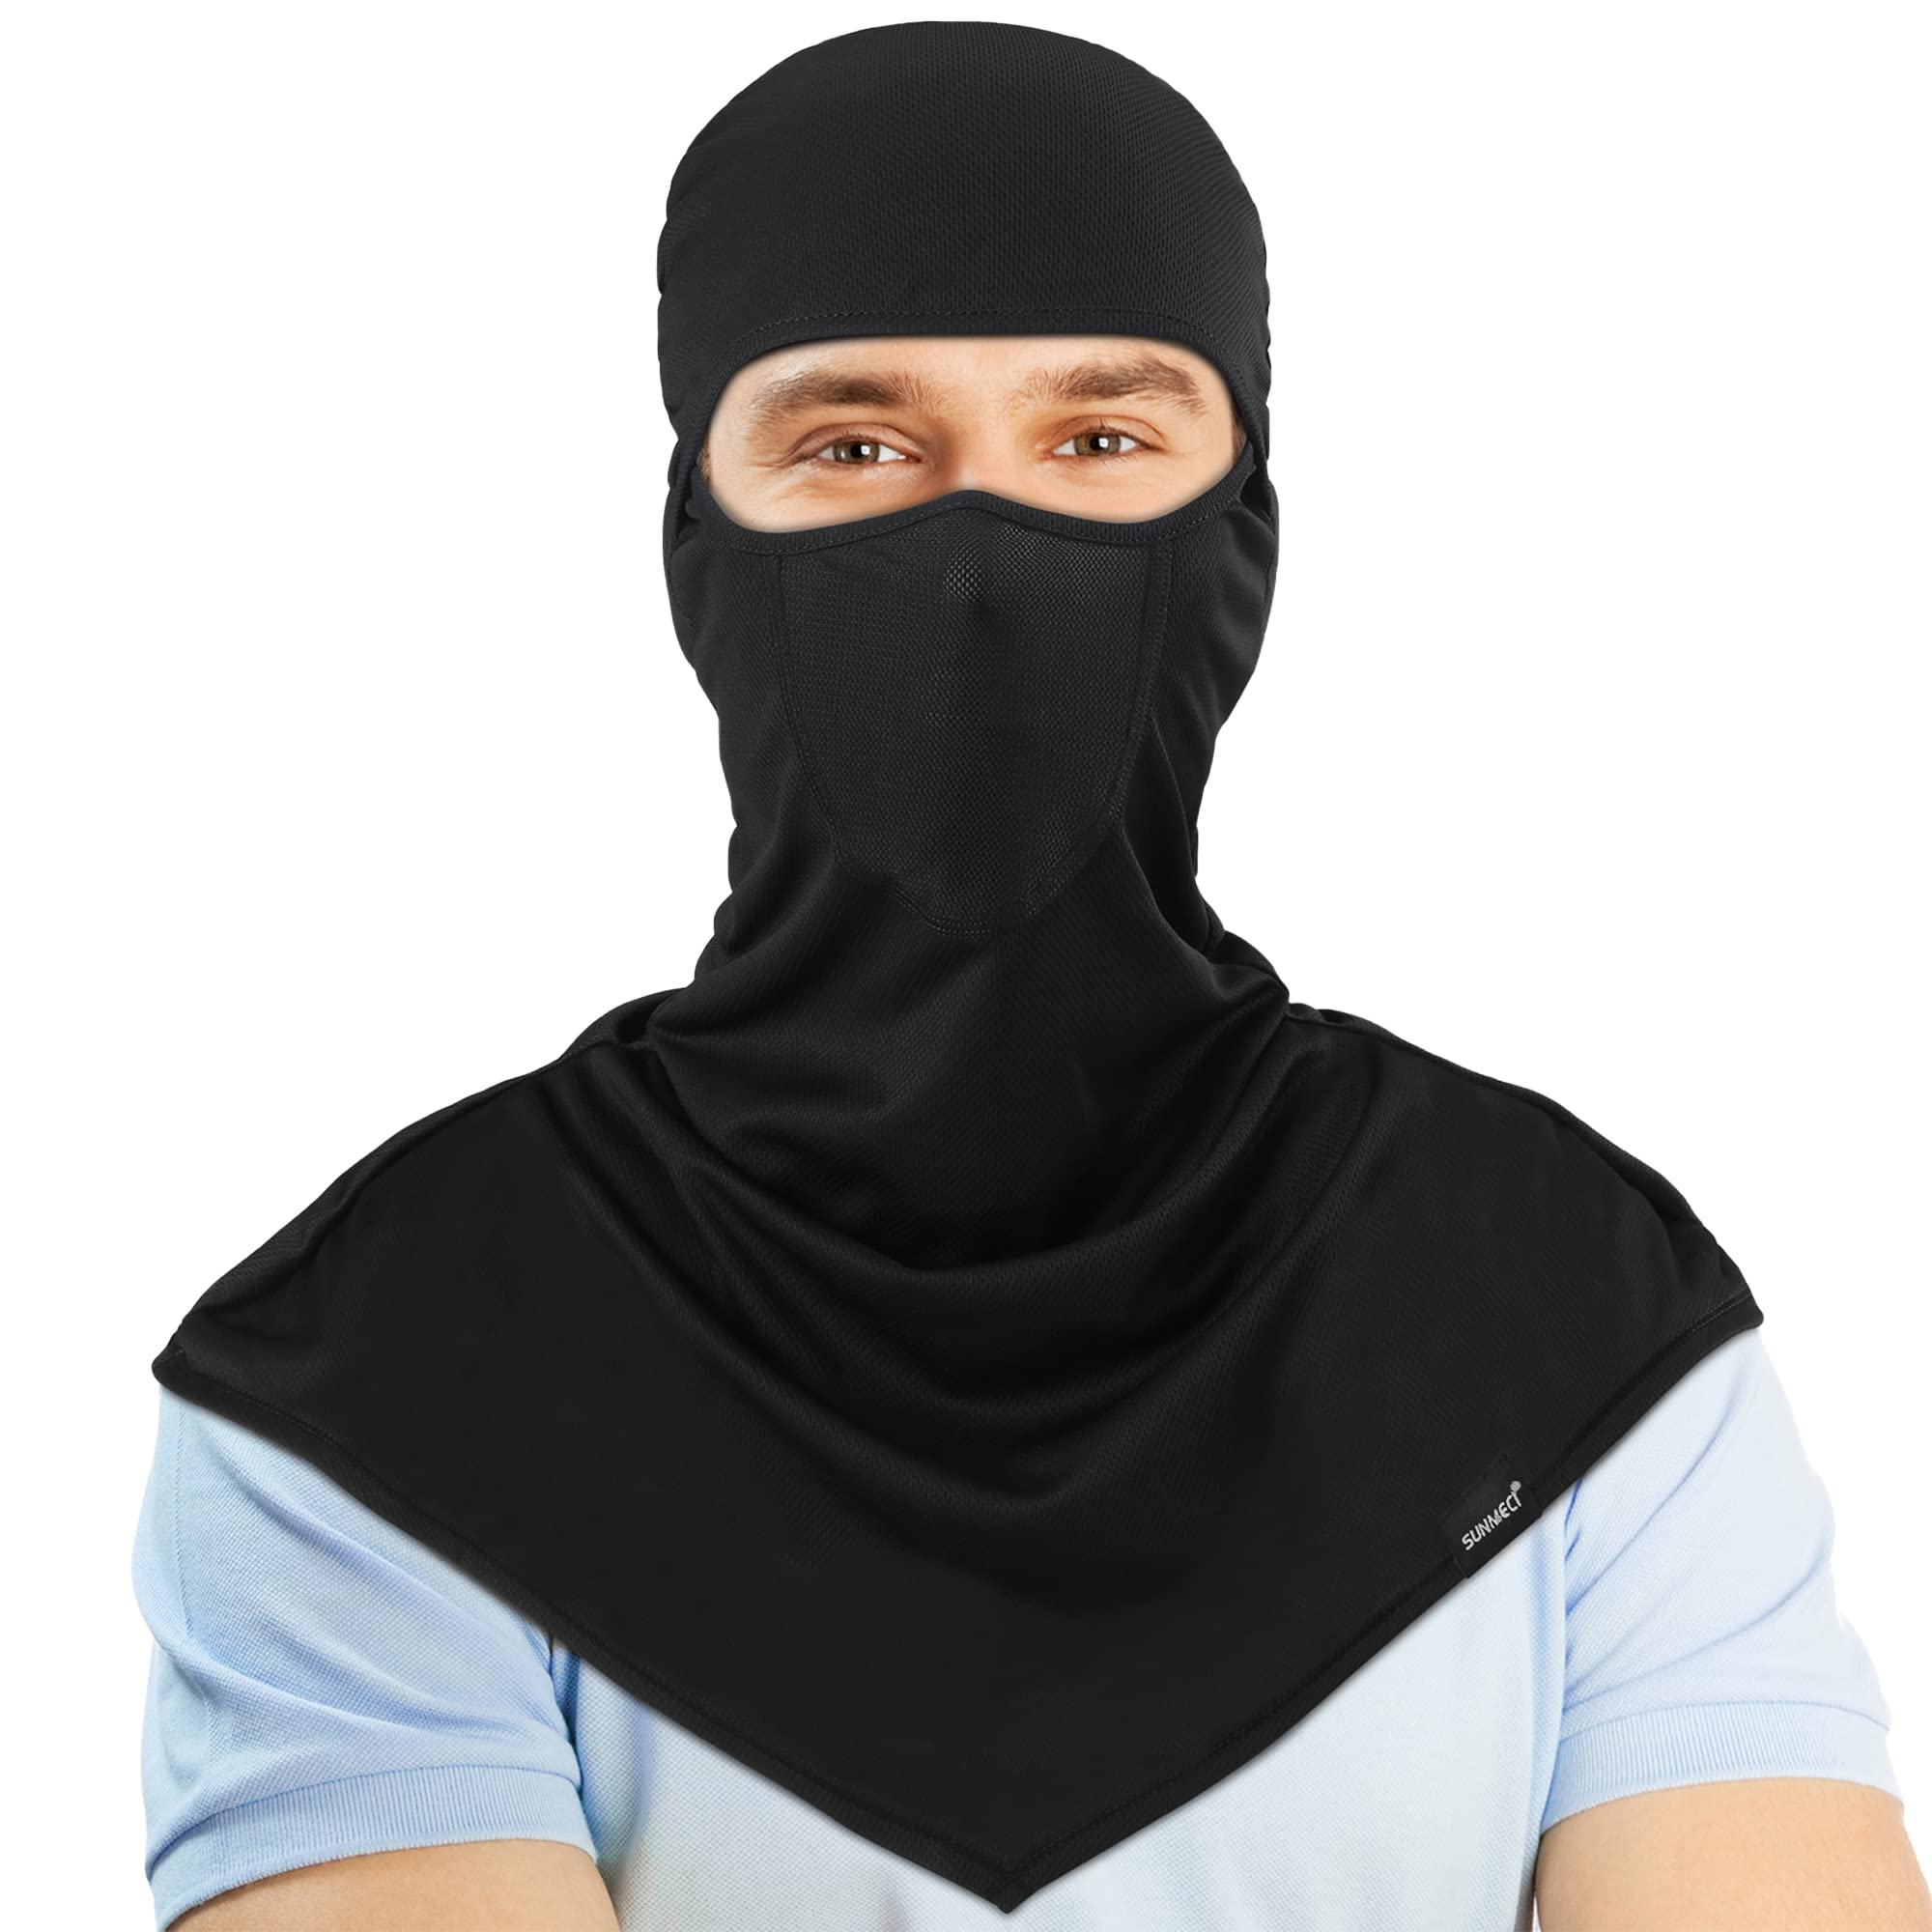 Balaclava Face Mask Sun/UV Protection Breathable Long Neck Covers for  Cycling Motorcycle Fishing Skiing Snowboarding Men Women